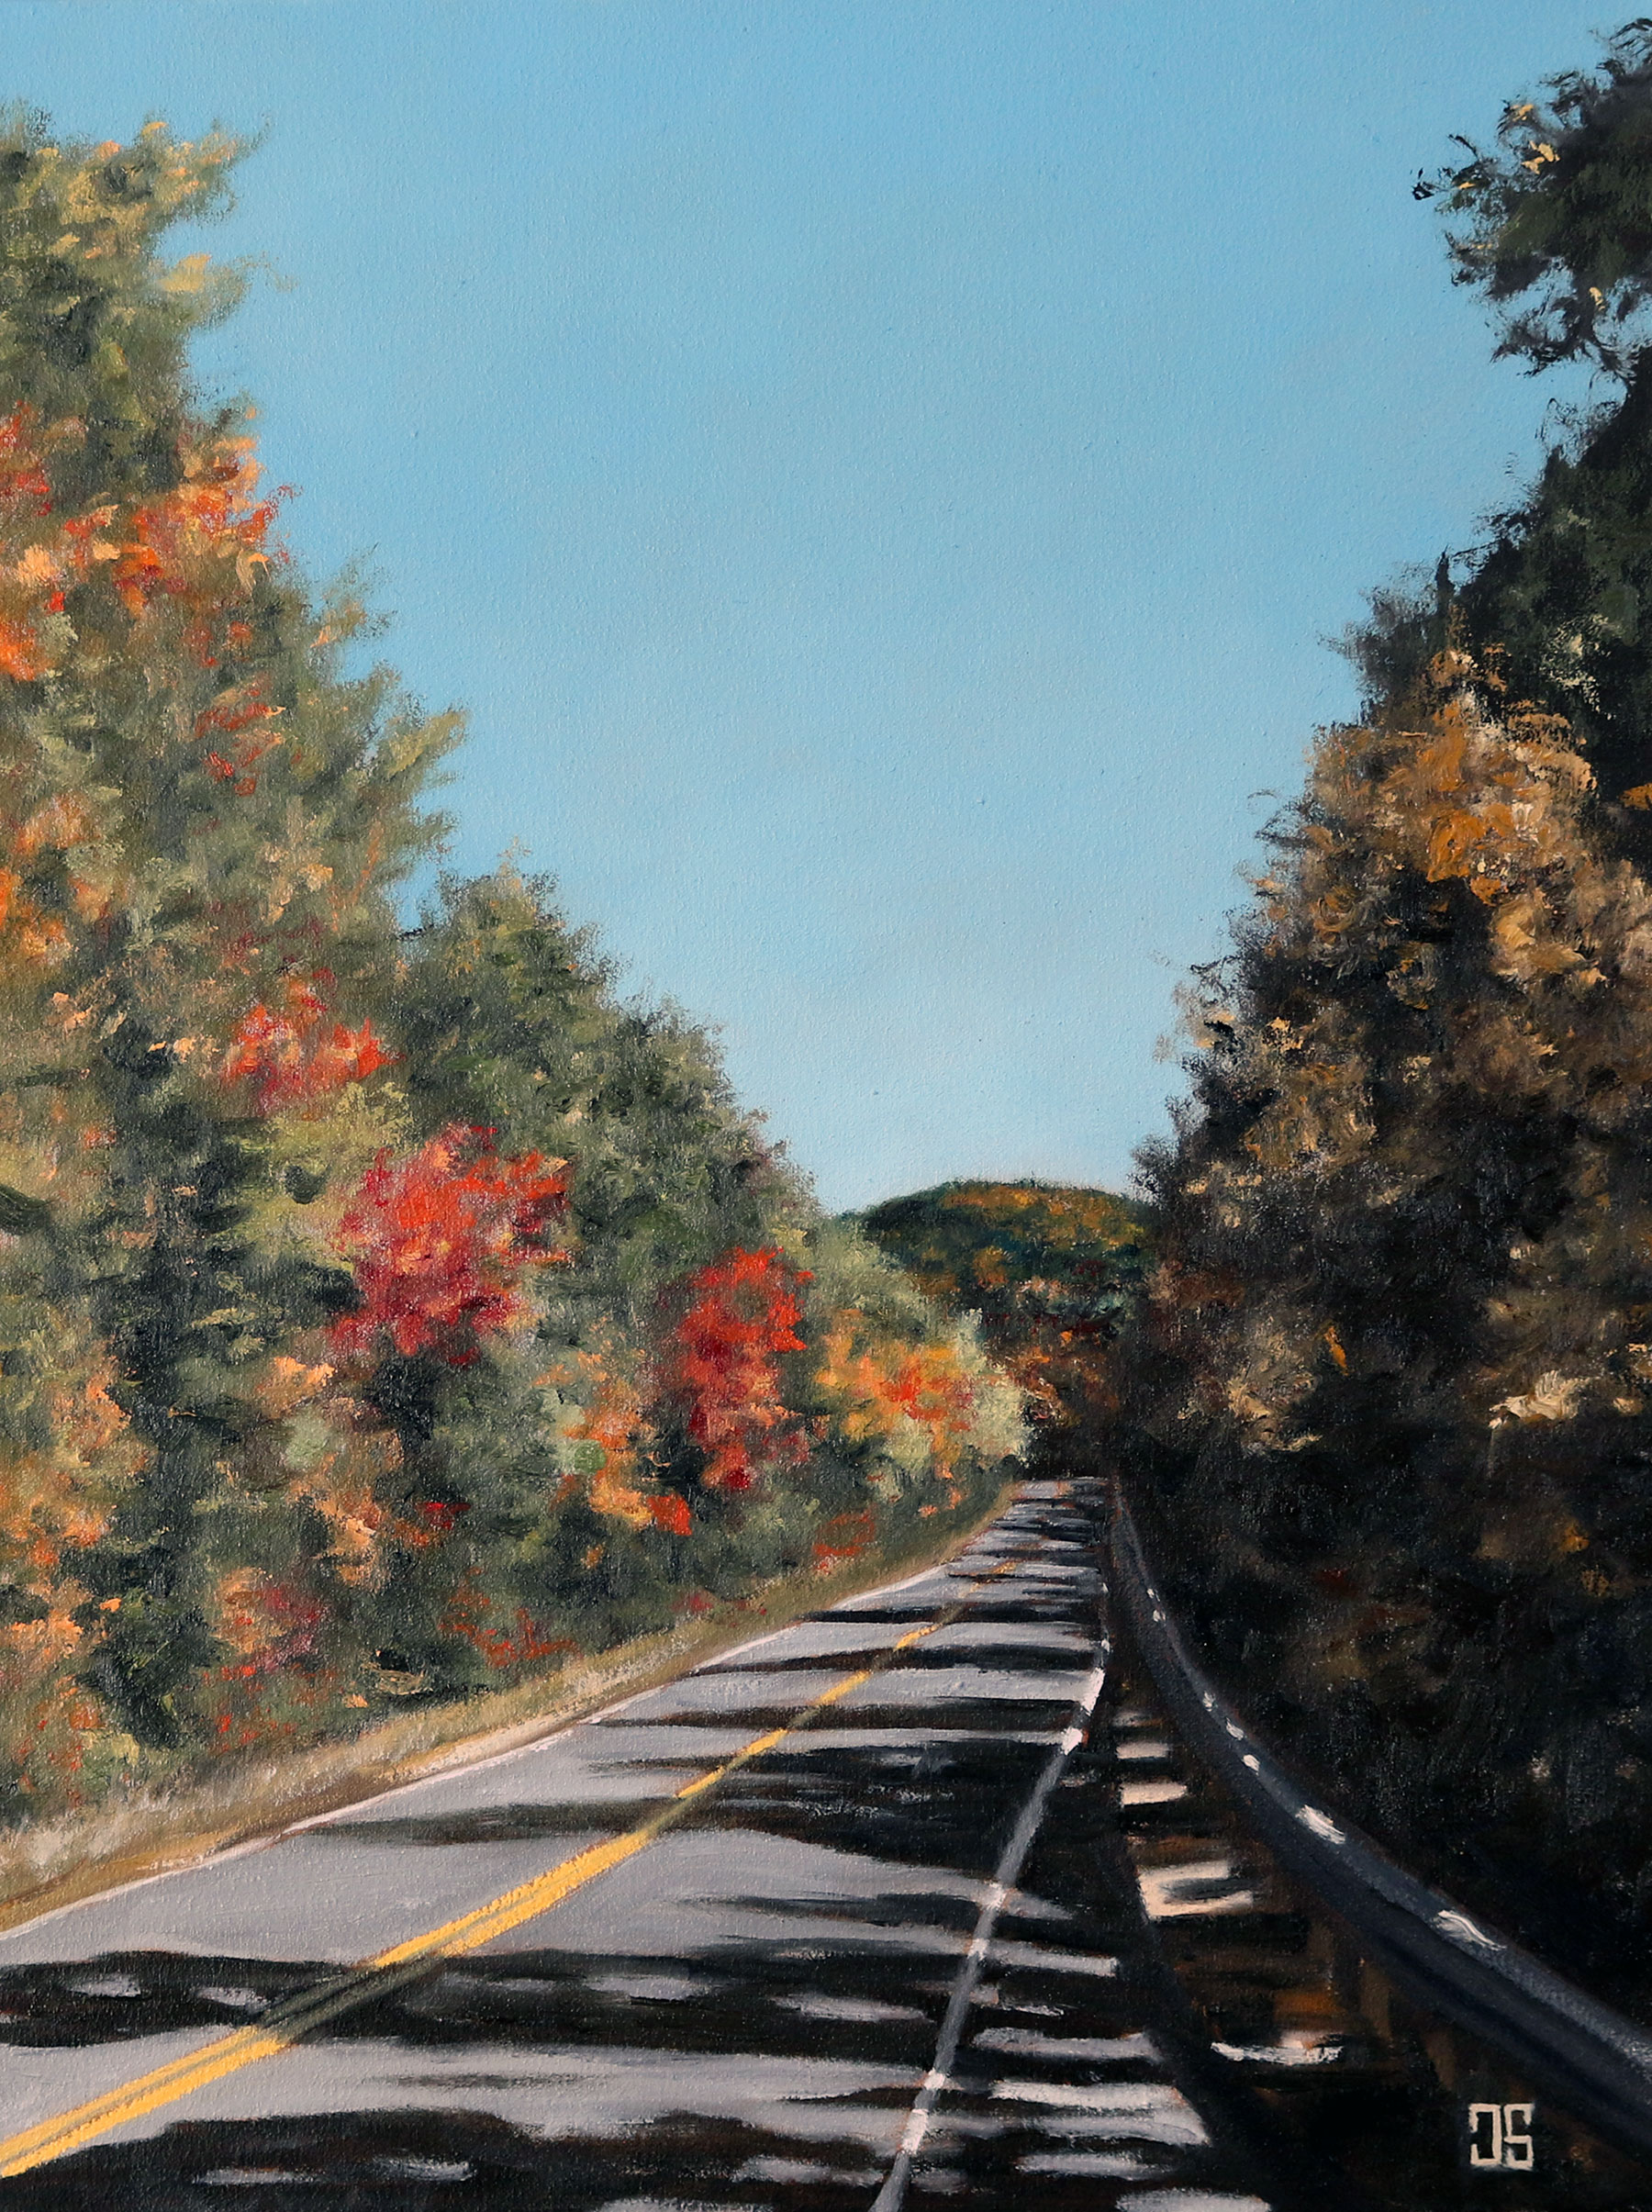 Oil painting "Kancamagus Highway, New Hampshire" by Jeffrey Dale Starr